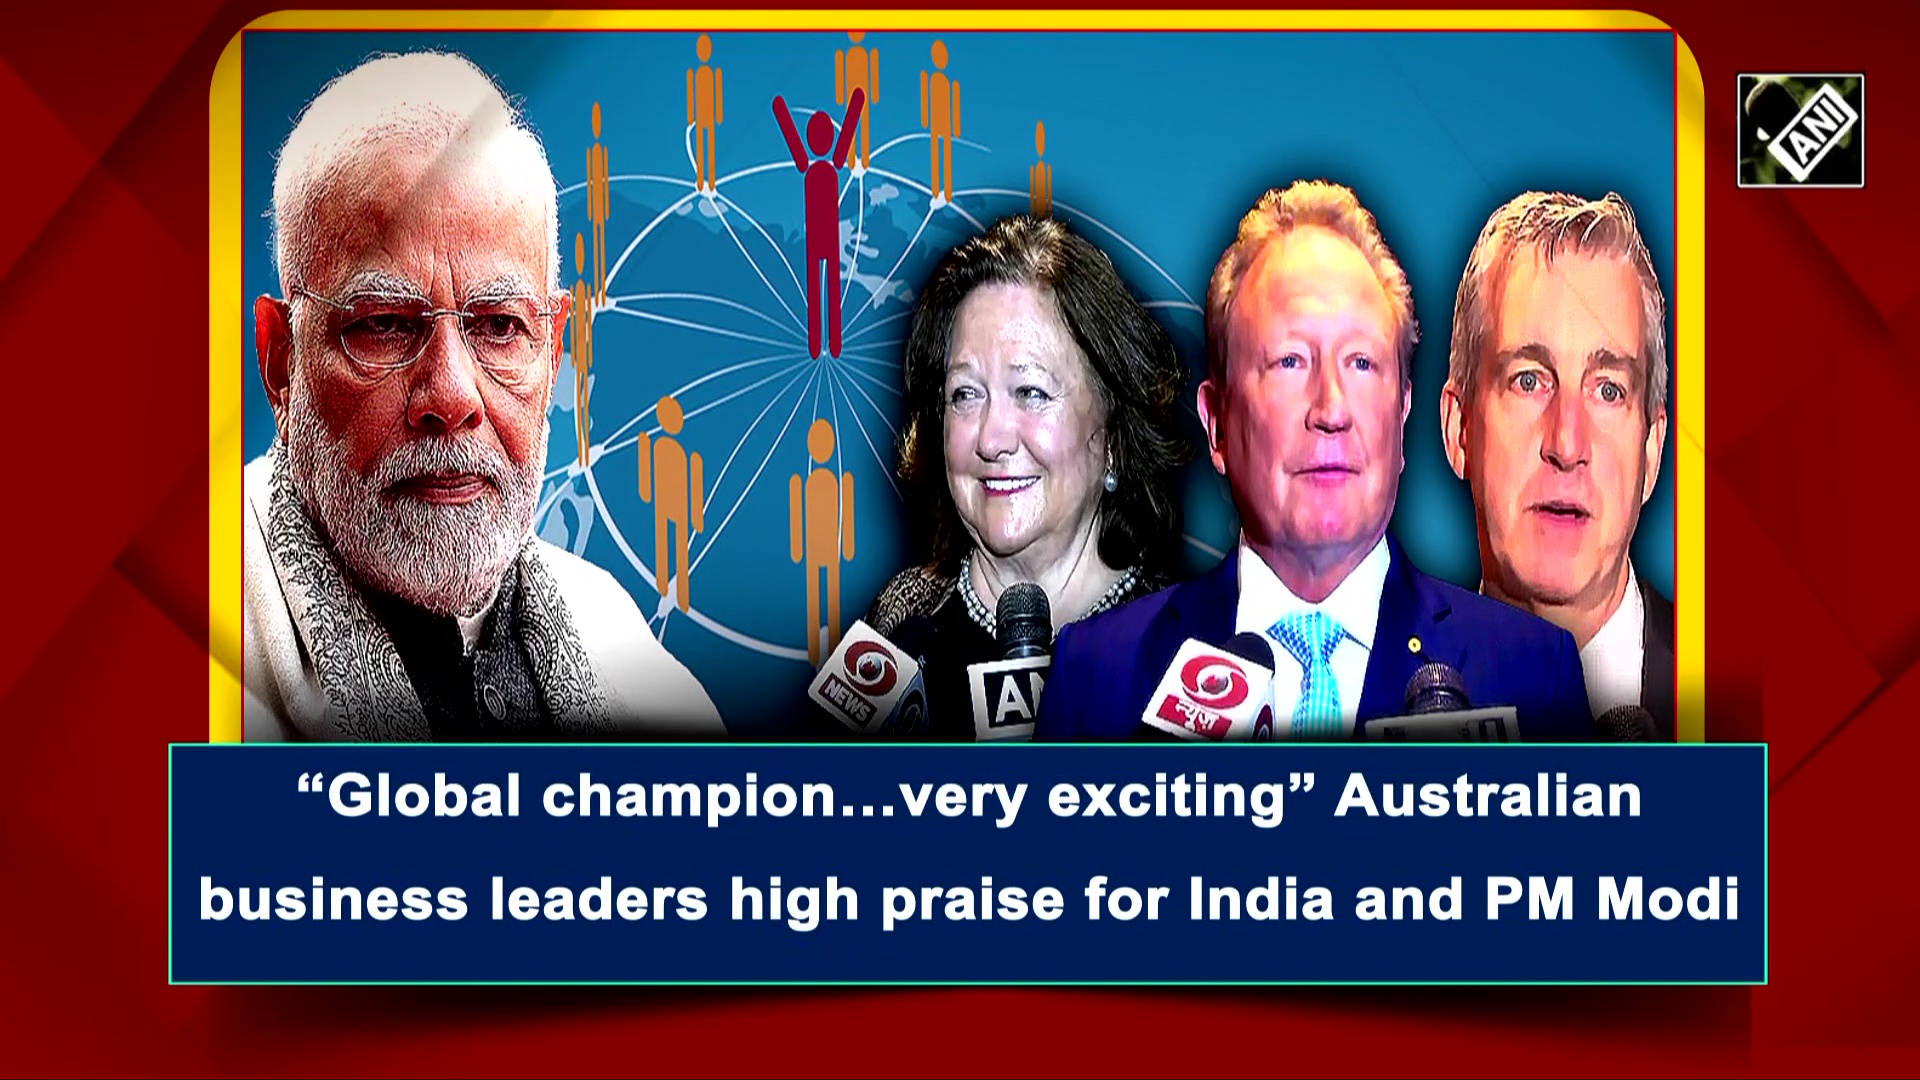 “Global champion…very exciting” Australian business leaders high praise for India and PM Modi